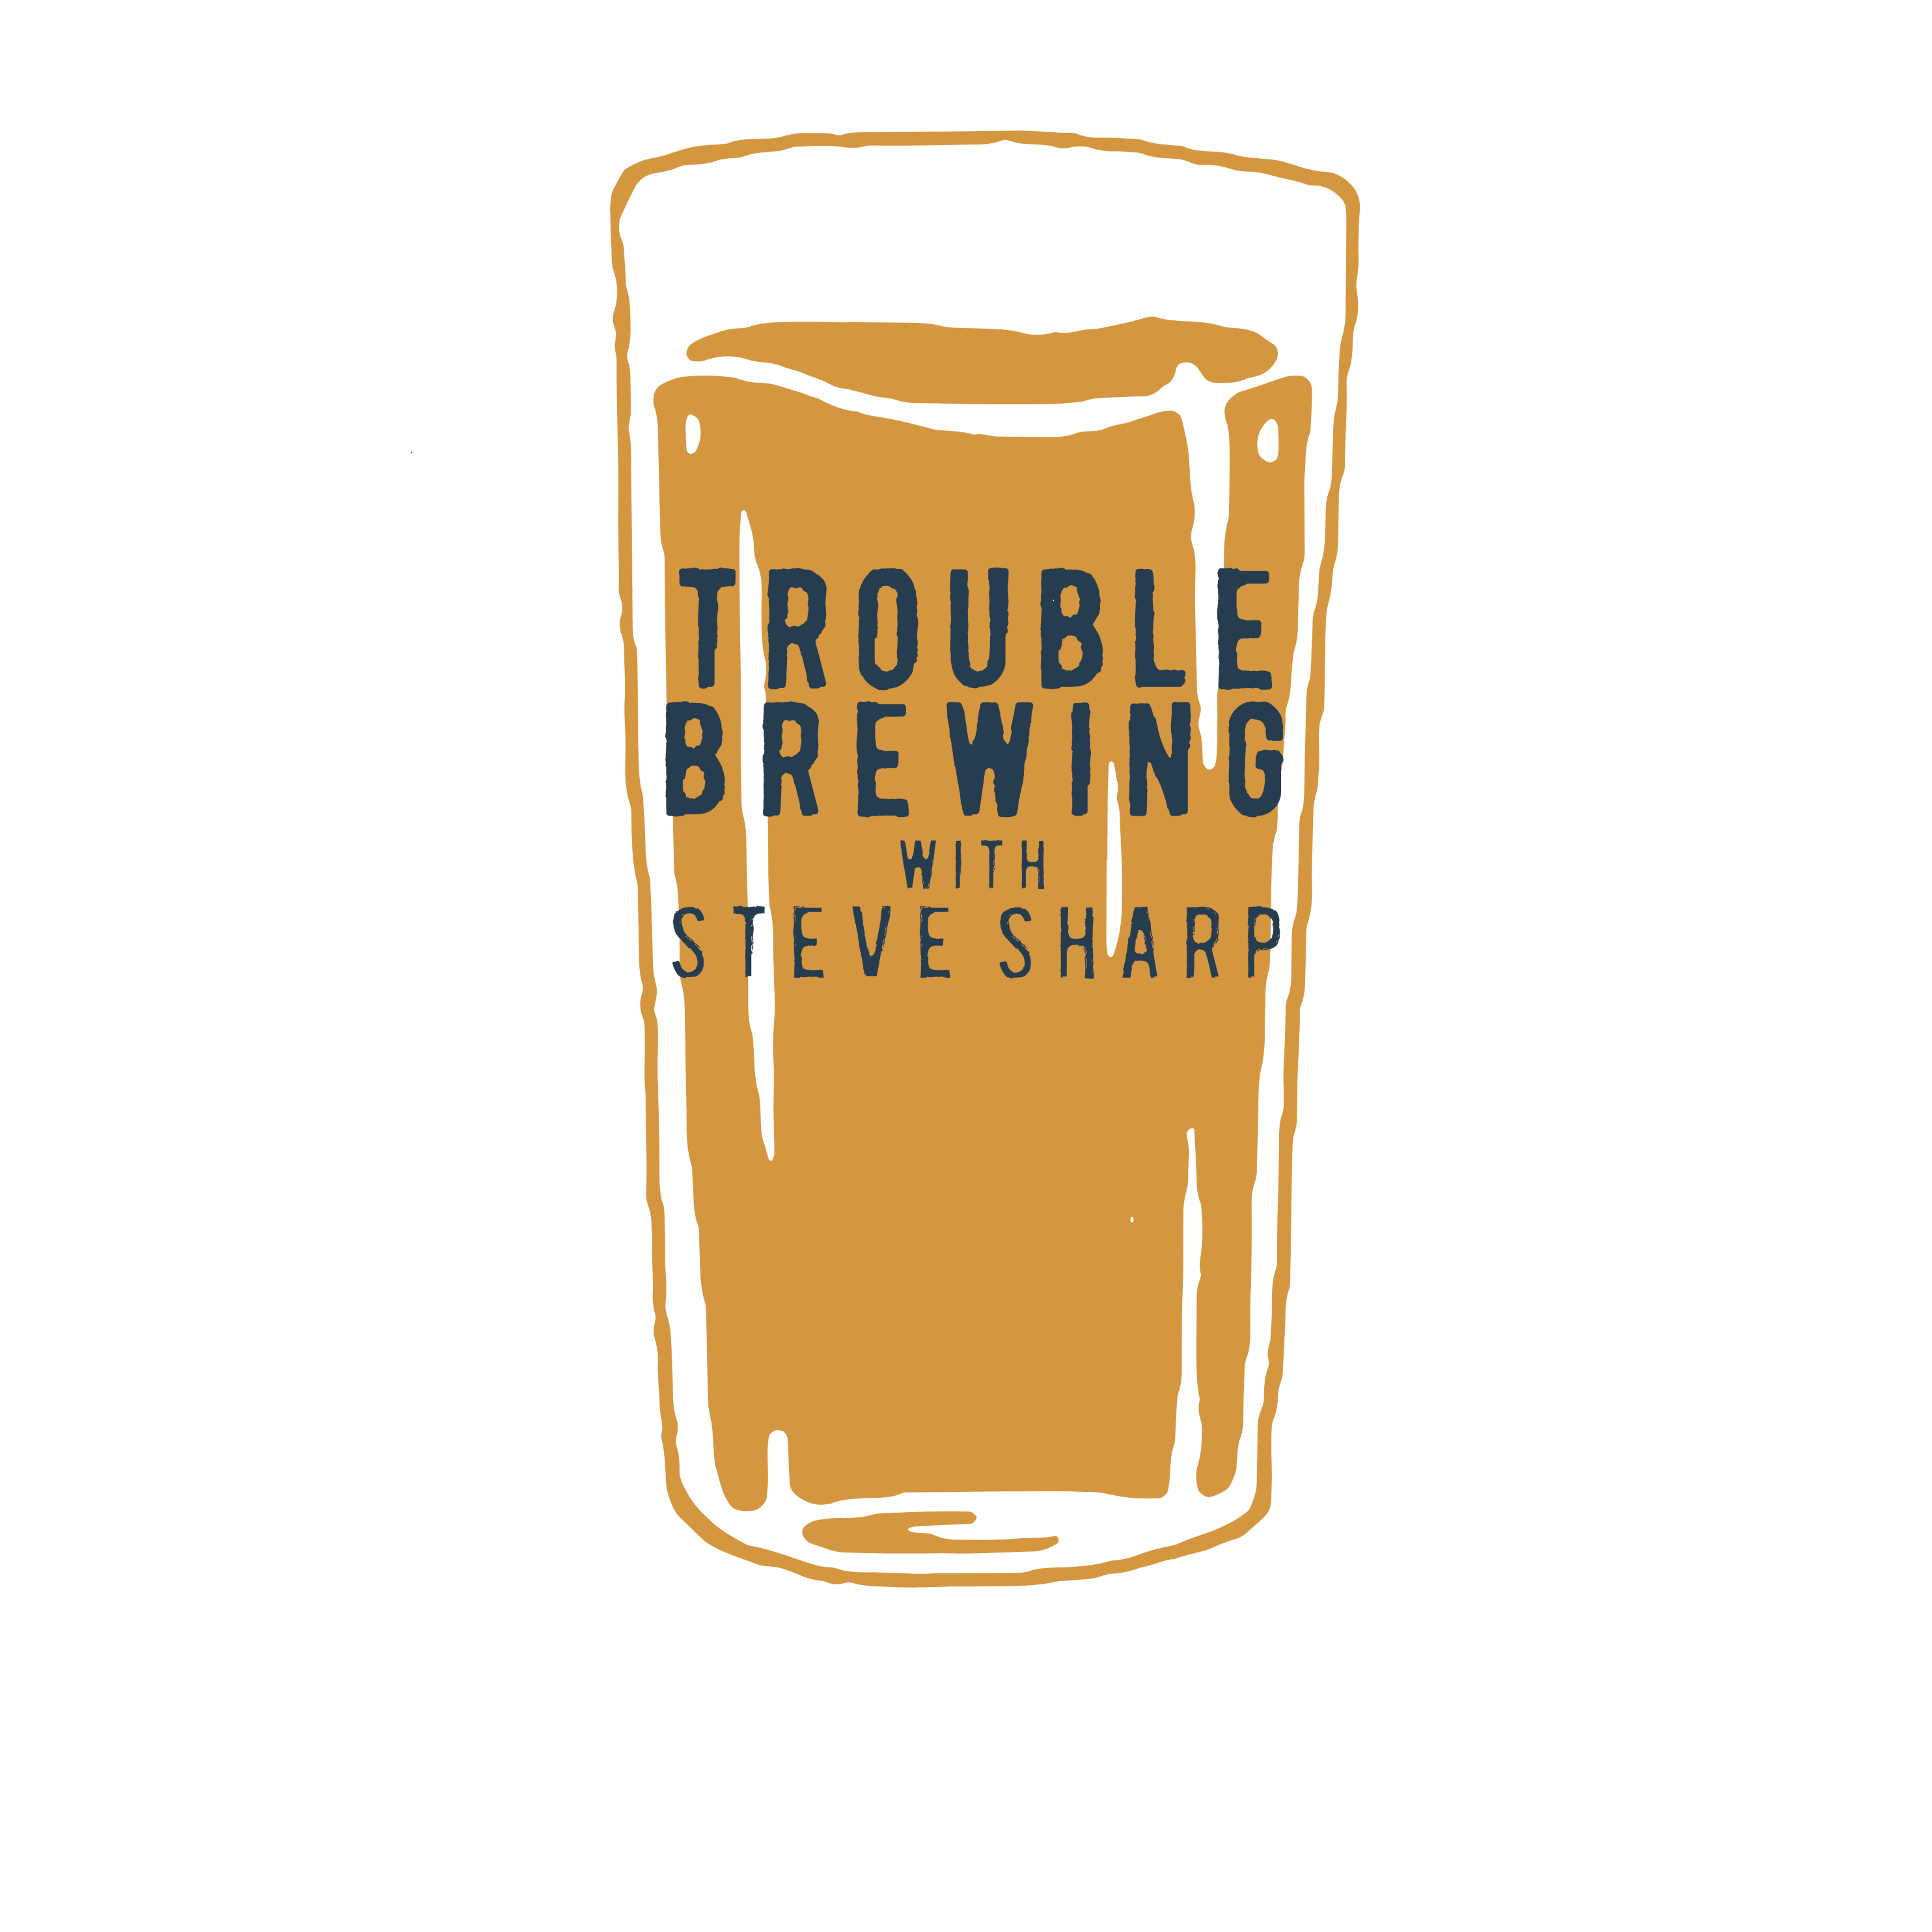 Artwork for Trouble Brewing with Steve Sharp